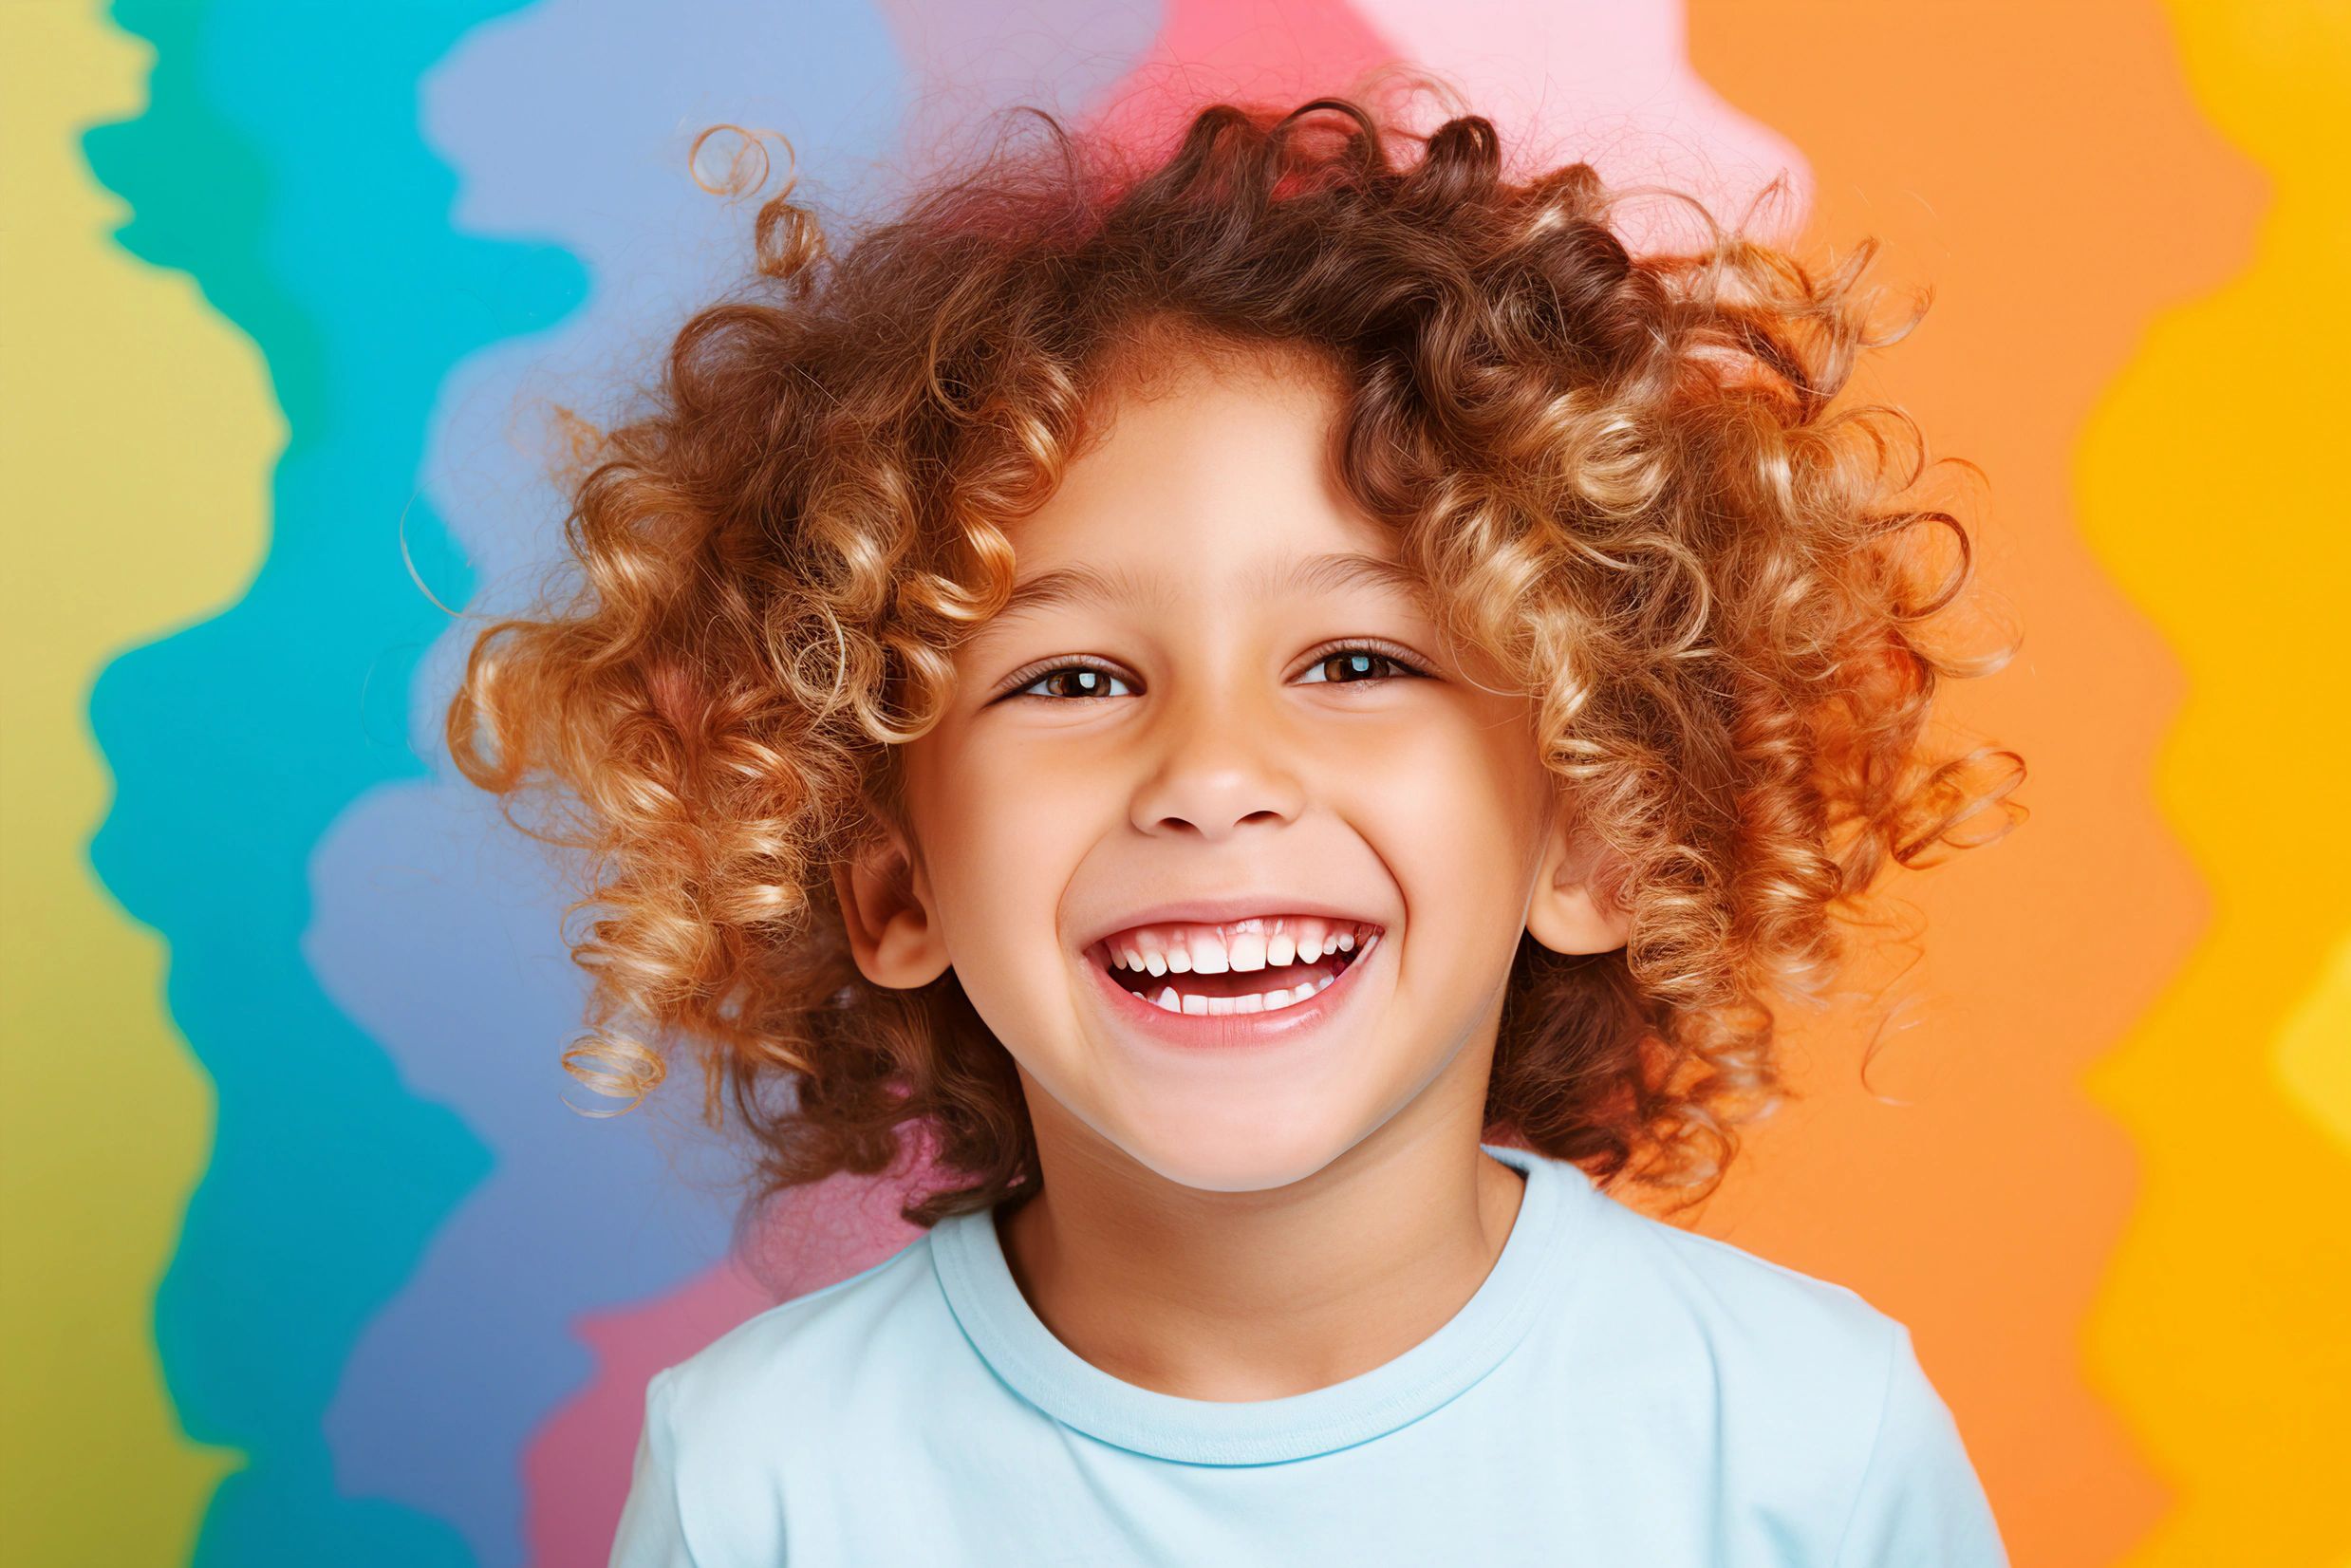 Pediatric Dentist Indianapolis | Fun & Friendly Visits for Kids | 7 Days Family Dental